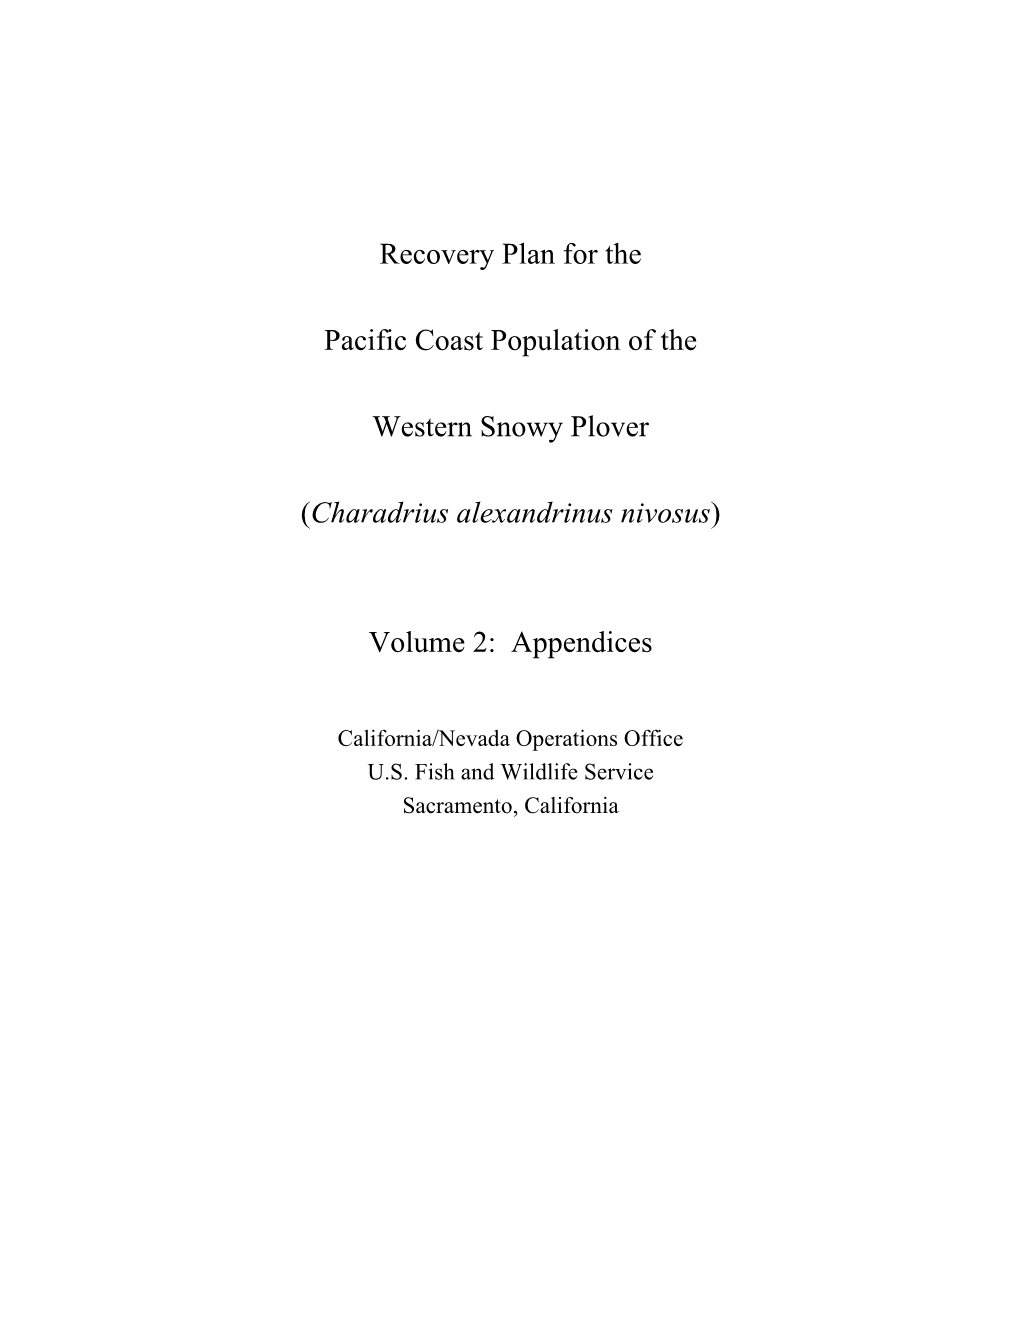 Recovery Plan for the Pacific Coast Population of the Western